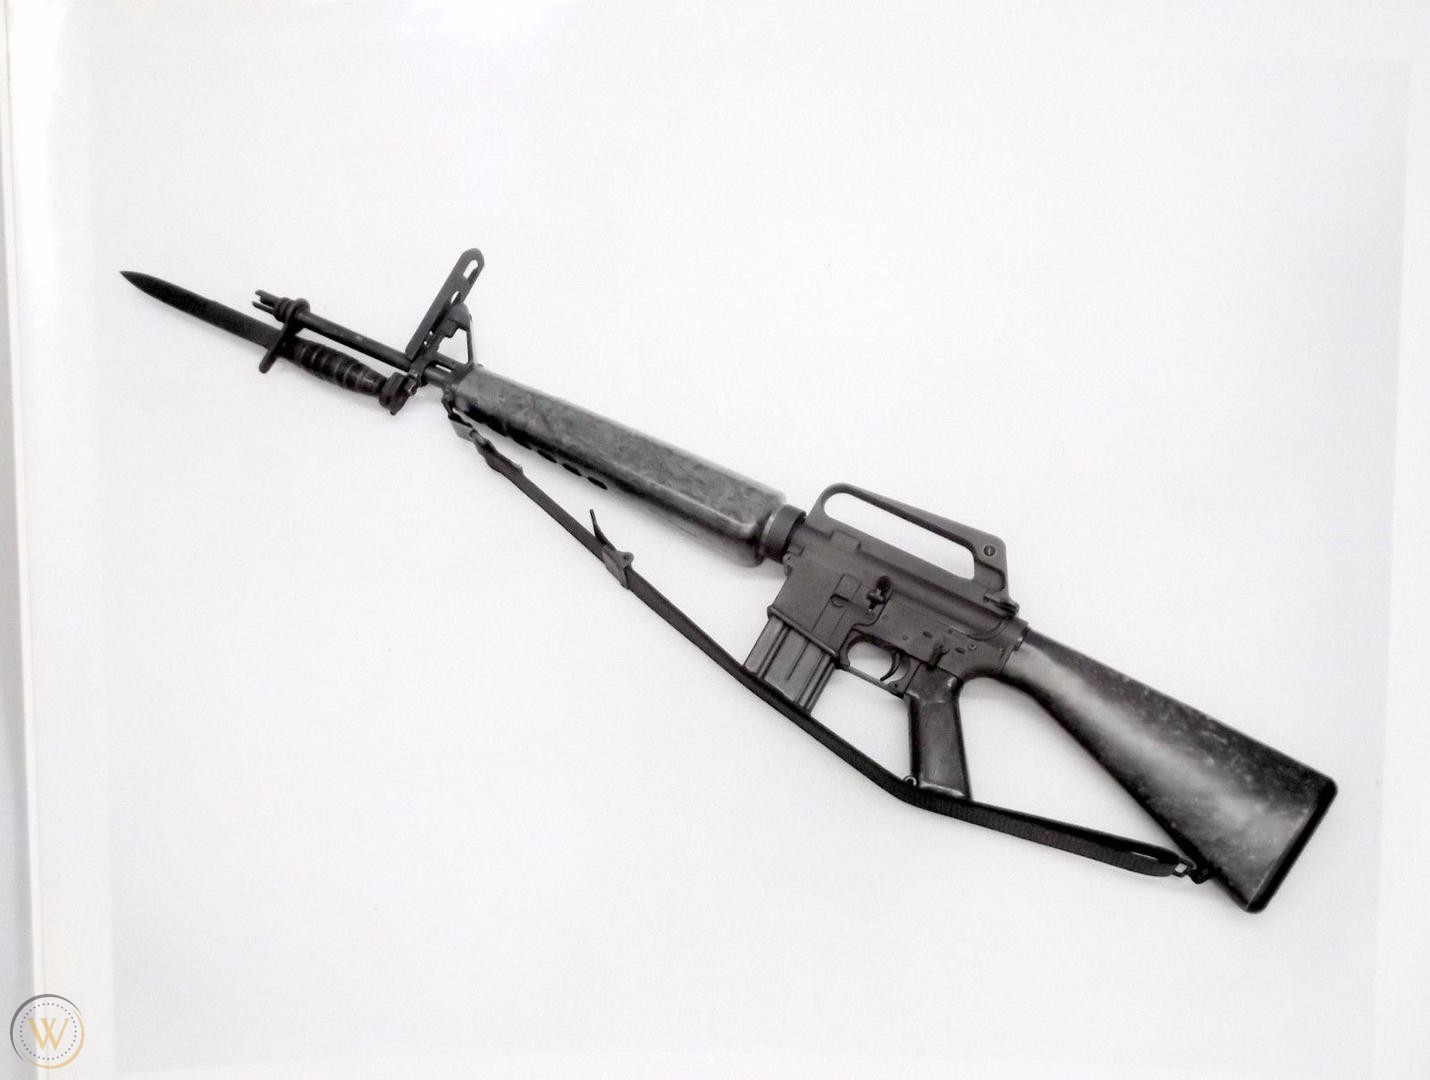 The Armalite AR-15 is one of the most iconic rifles of the past century.